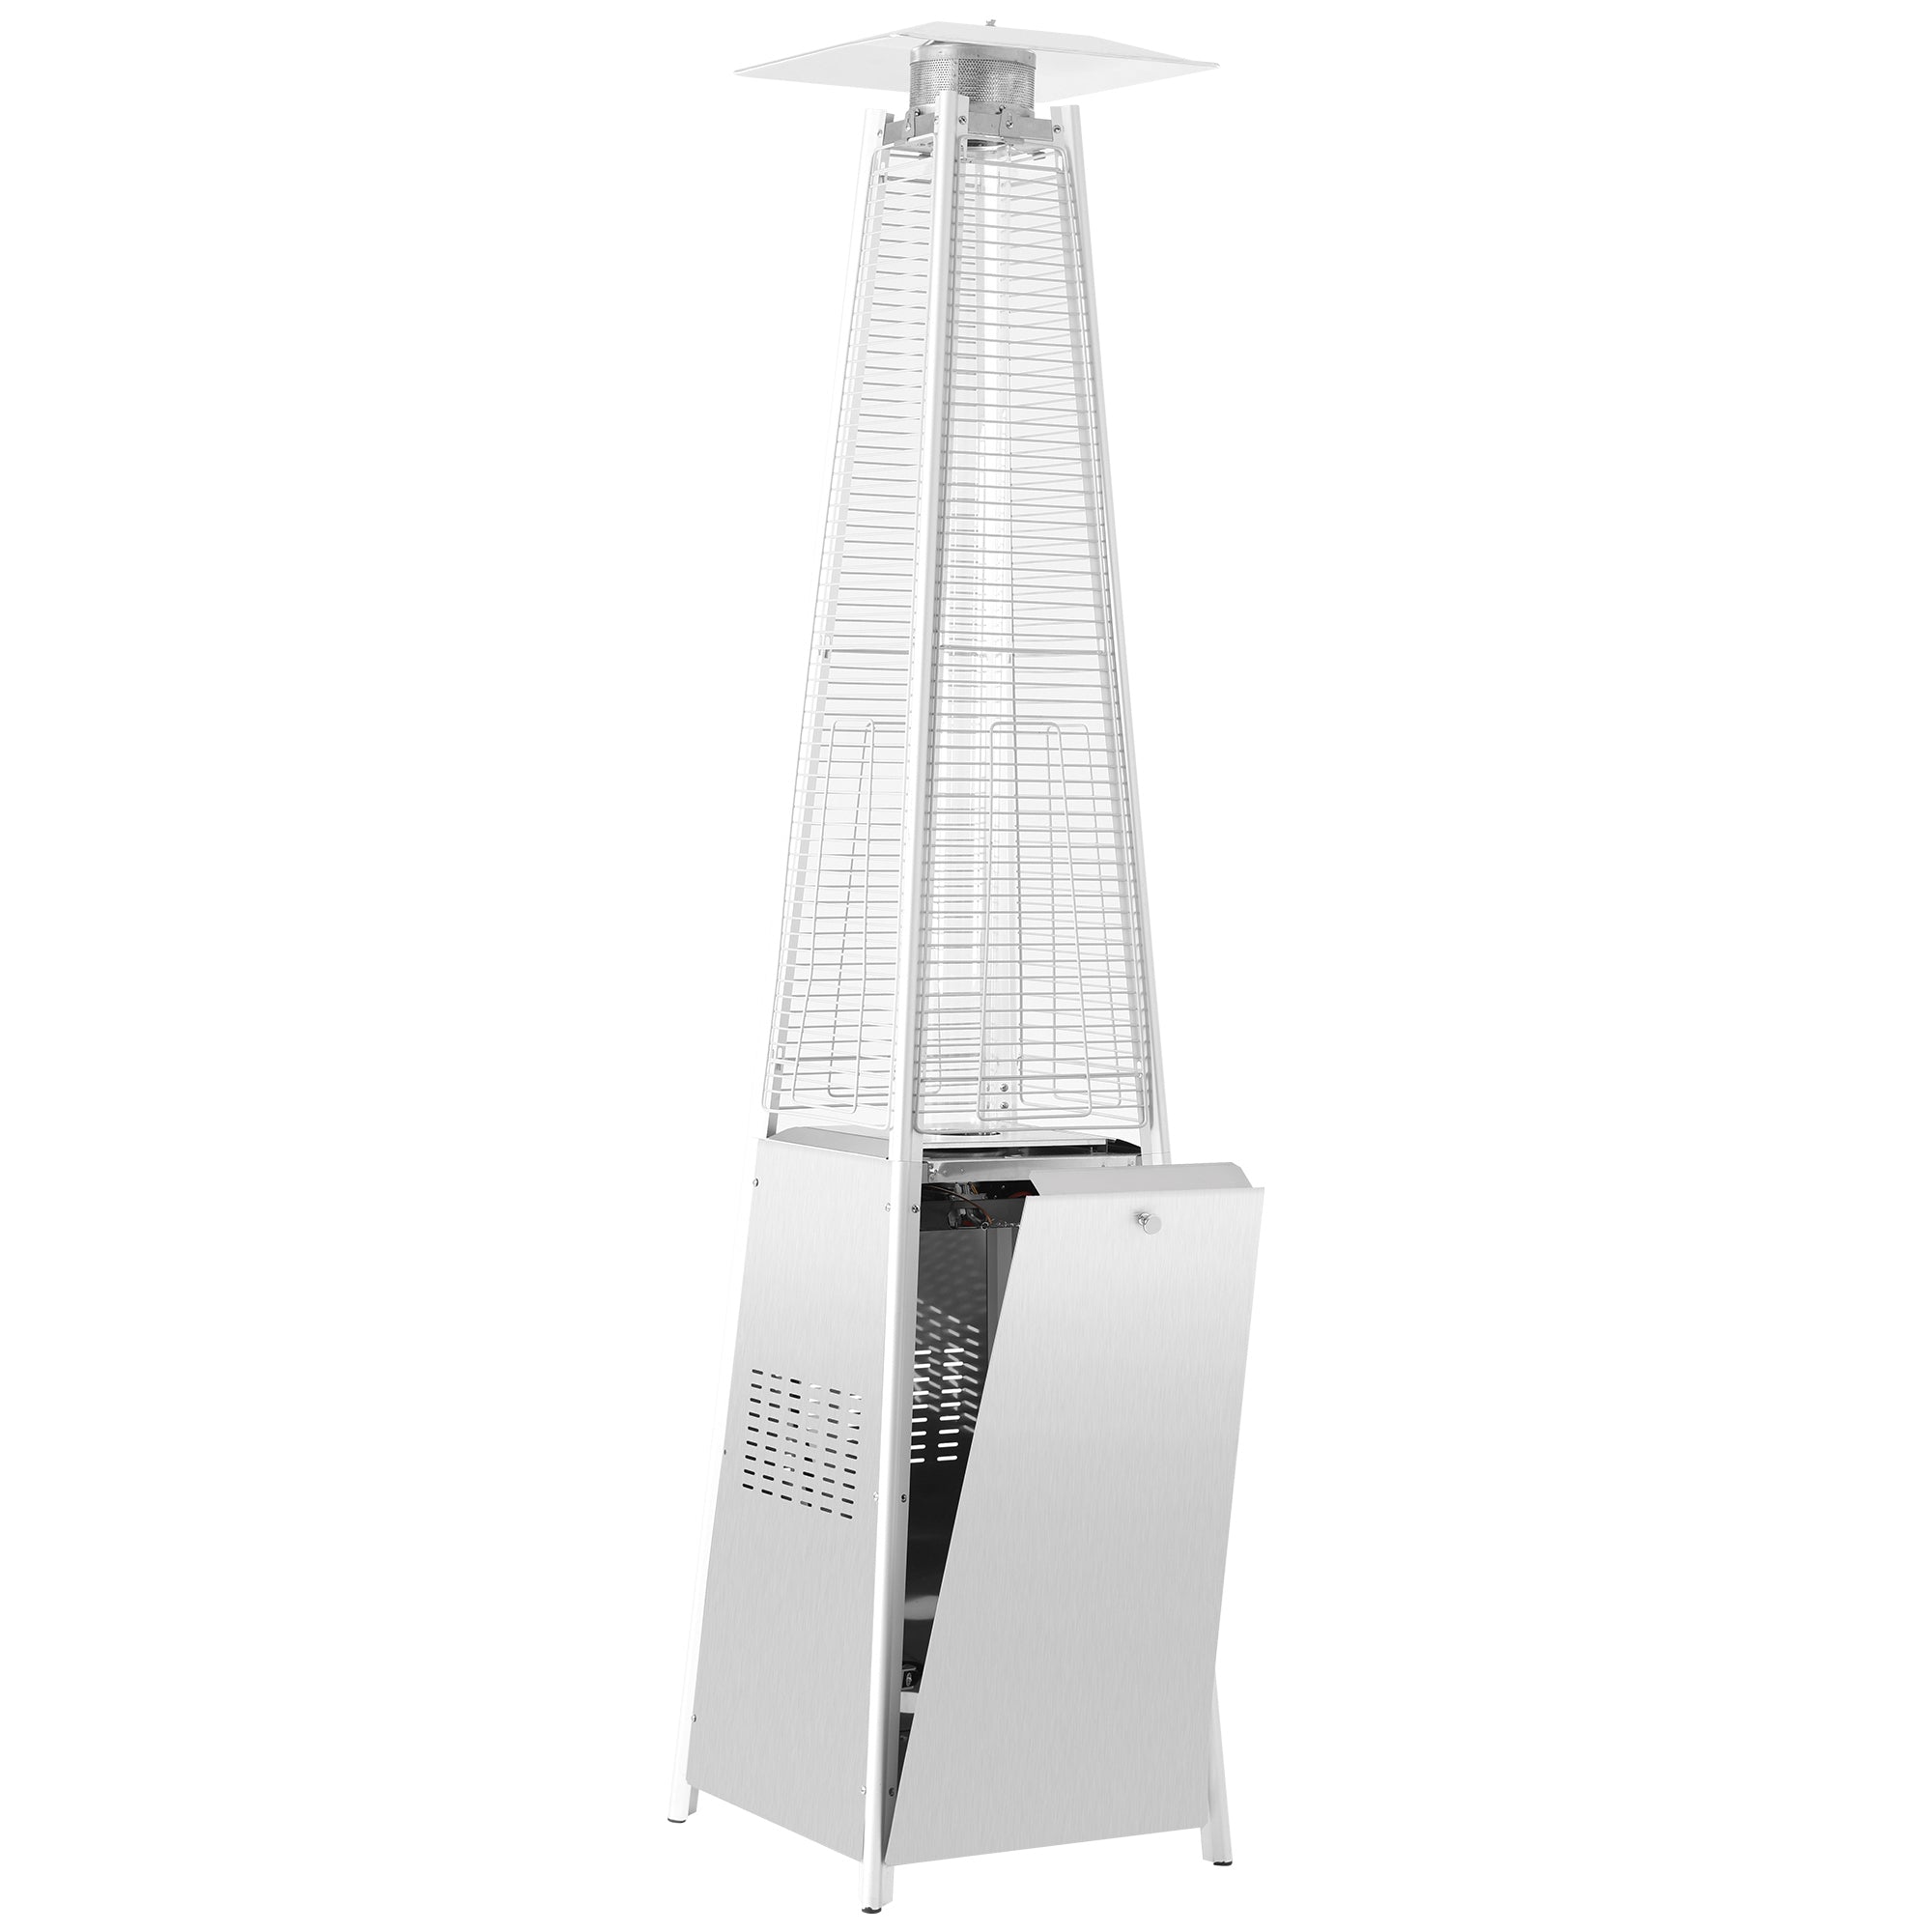 GO 42000 BTU Stainless Steel Material Pyramid Glass Tube Flame Outdoor Heater with Long Strips of Flame with Aluminum Top Reflector Shield Heating Up to 115 Square feet